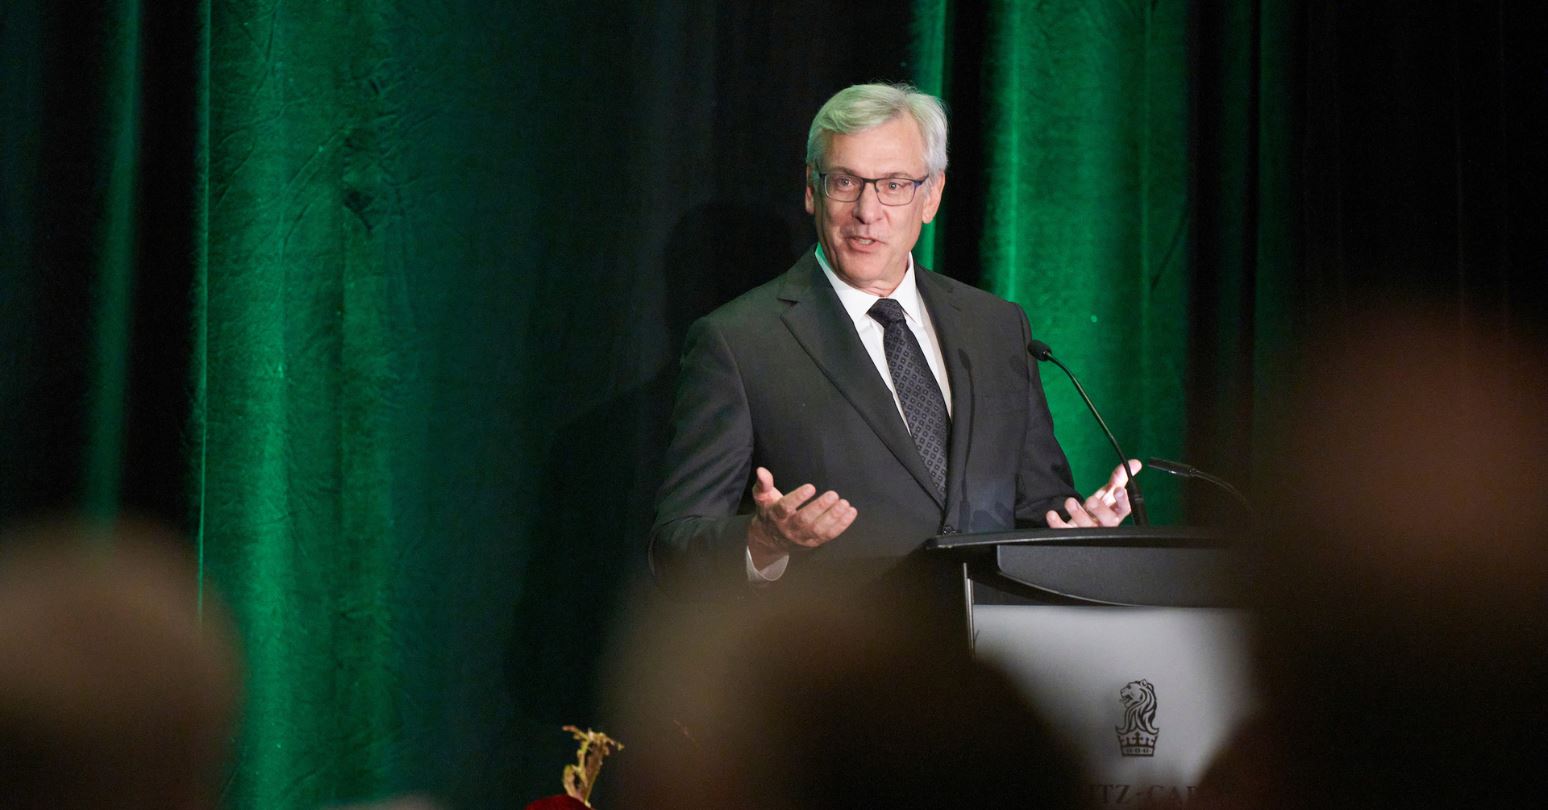 Dave McKay, MBA ’92, LLD ’19, honoured with the Ivey Business Leader Award